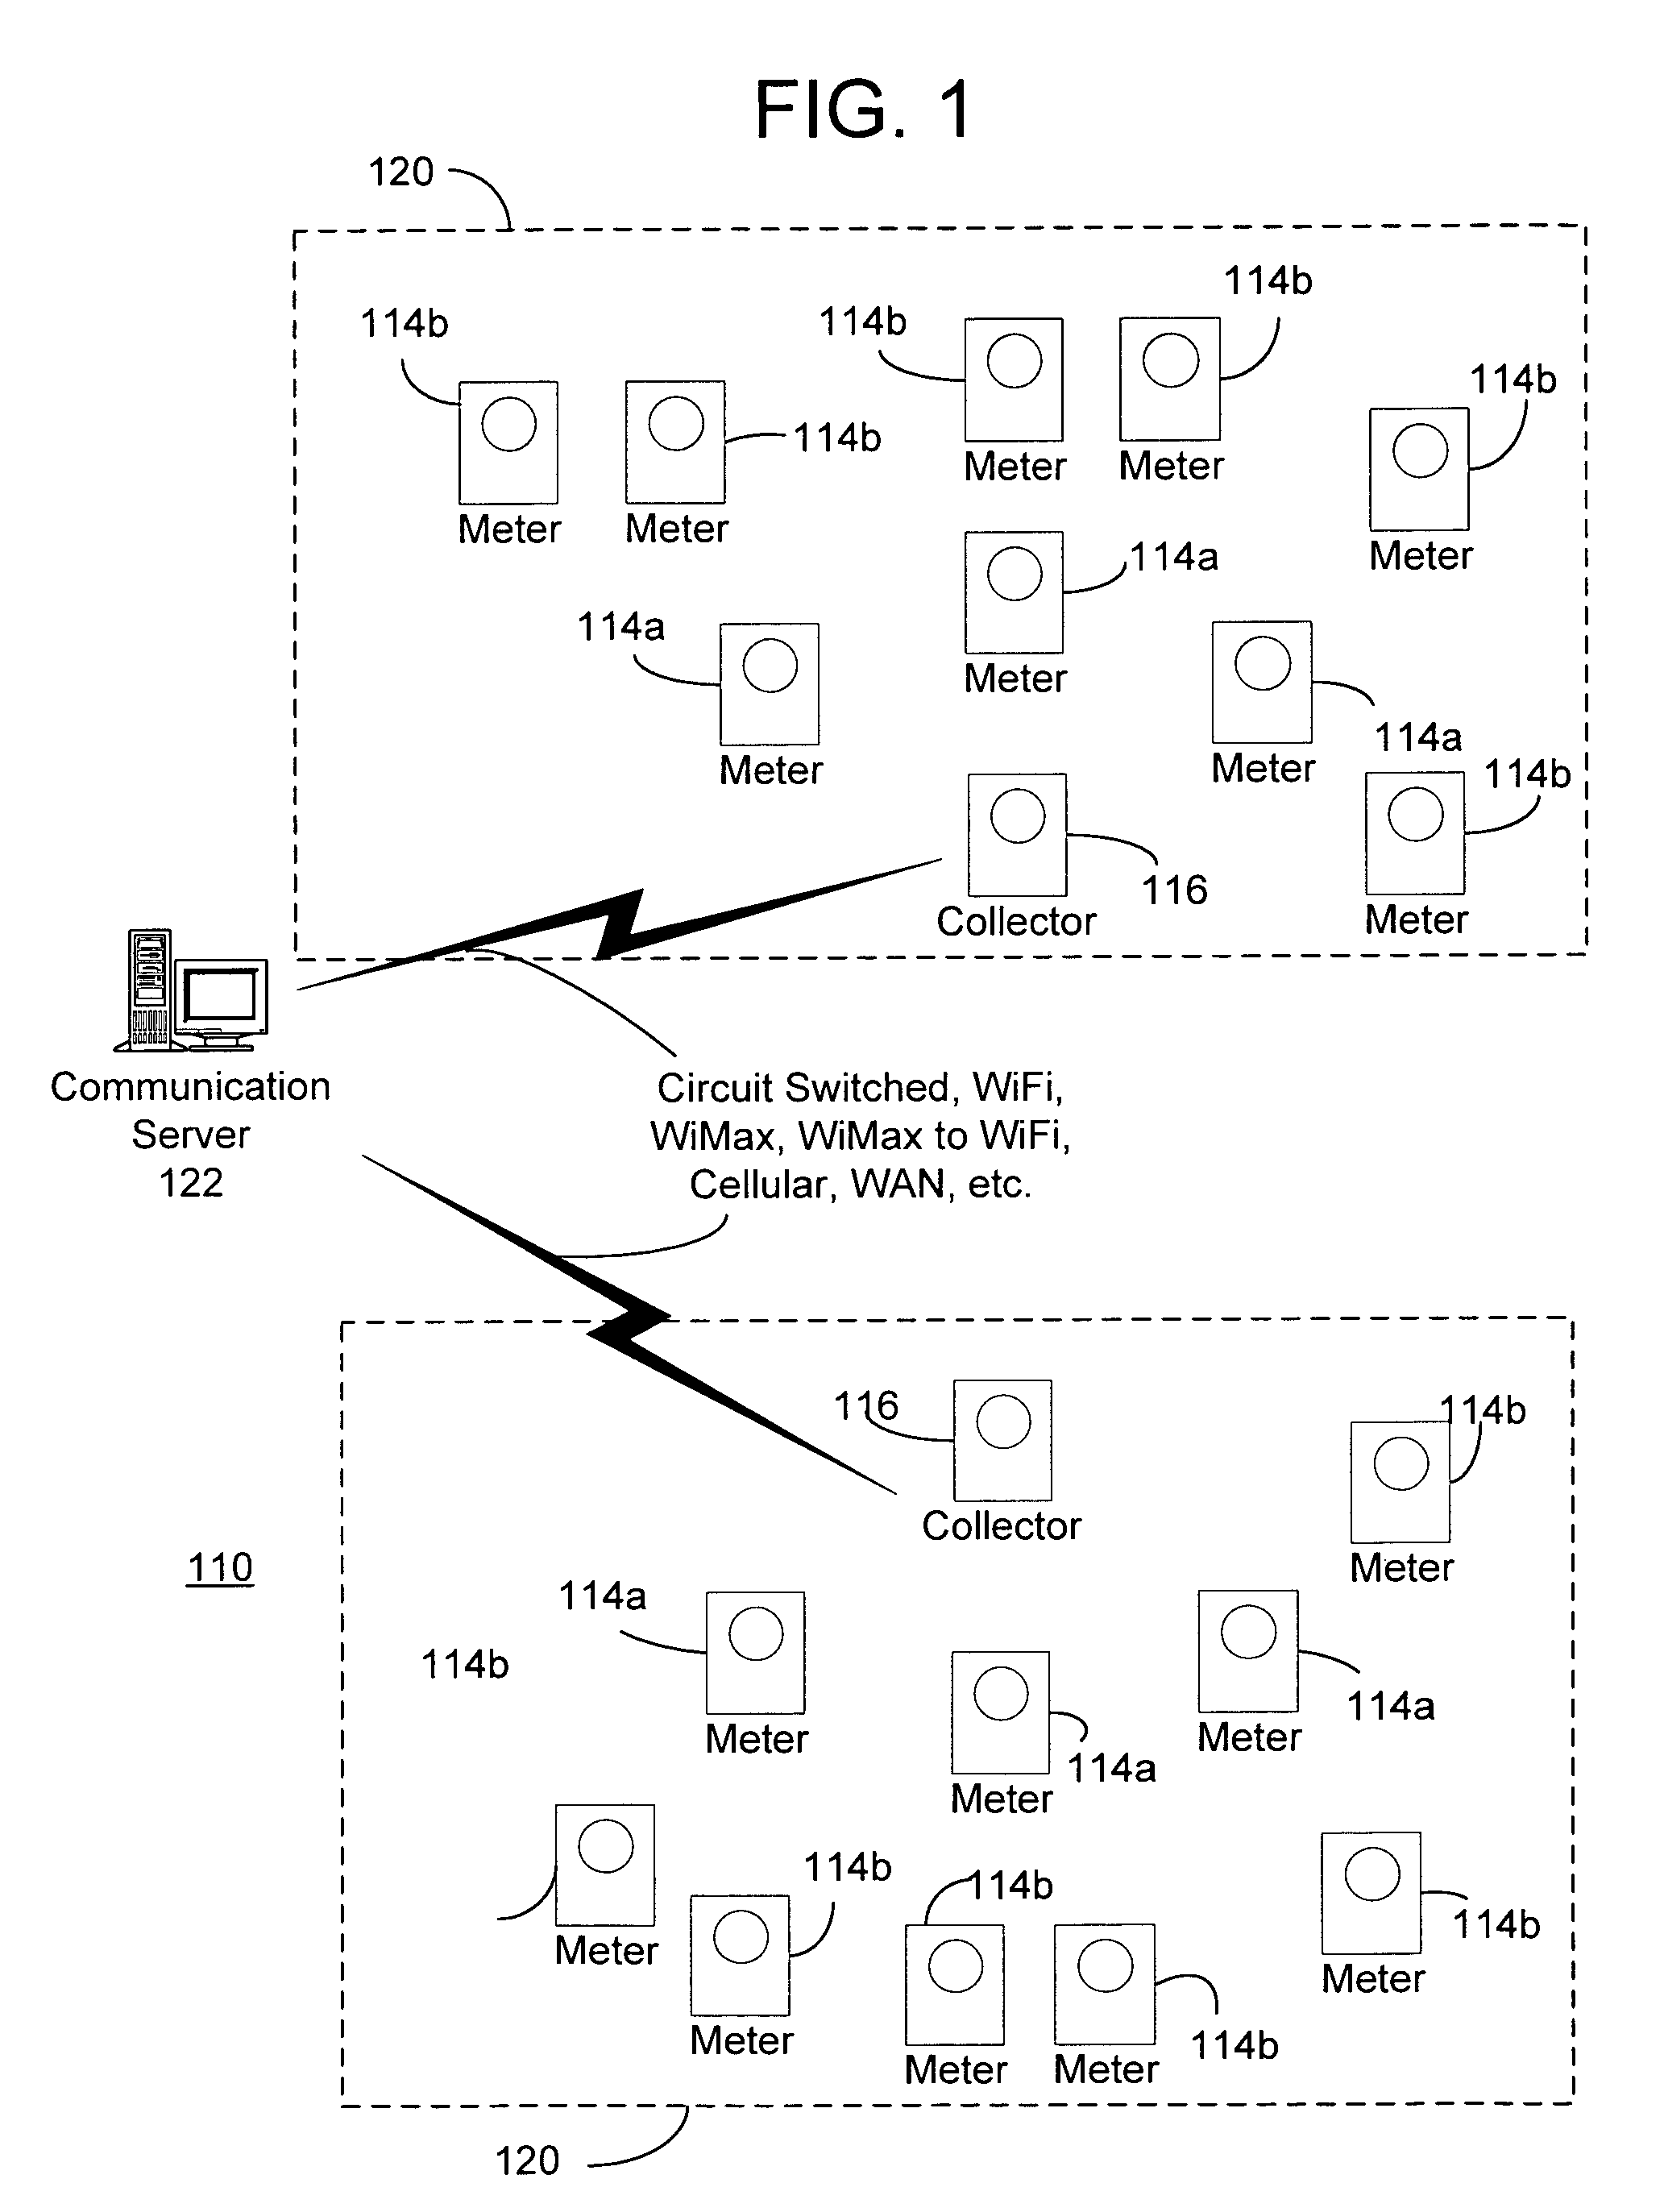 Mesh AMR network interconnecting to TCP/IP wireless mesh network